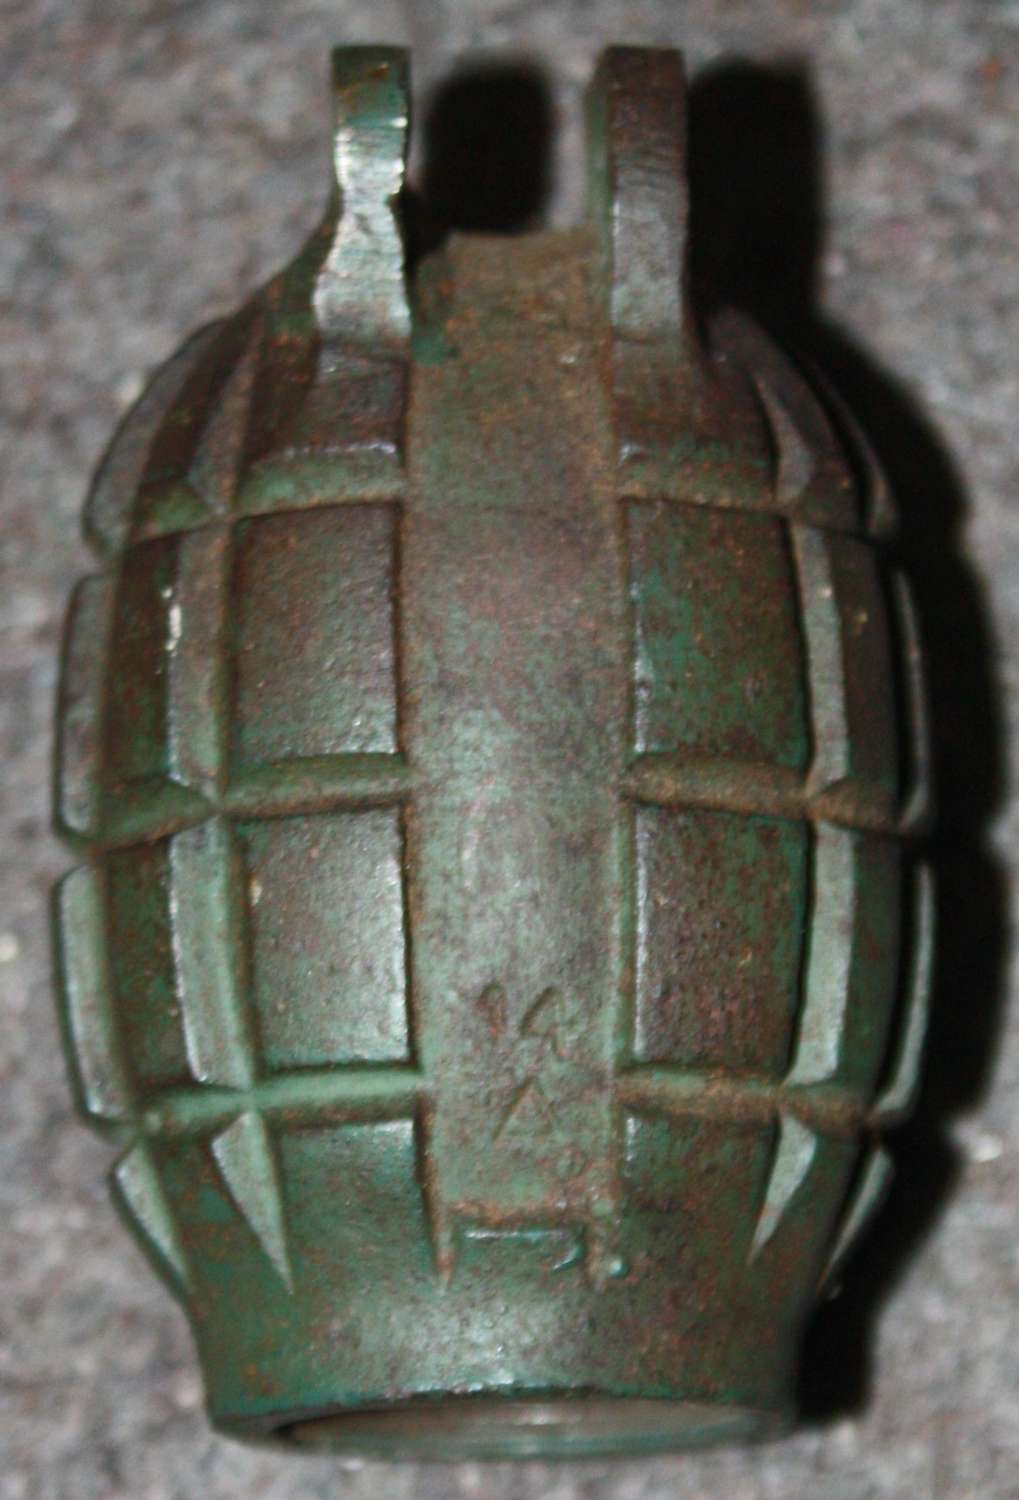 A MILLS BOMB WHICH HAS BEEN REPAIRED ( EAR )